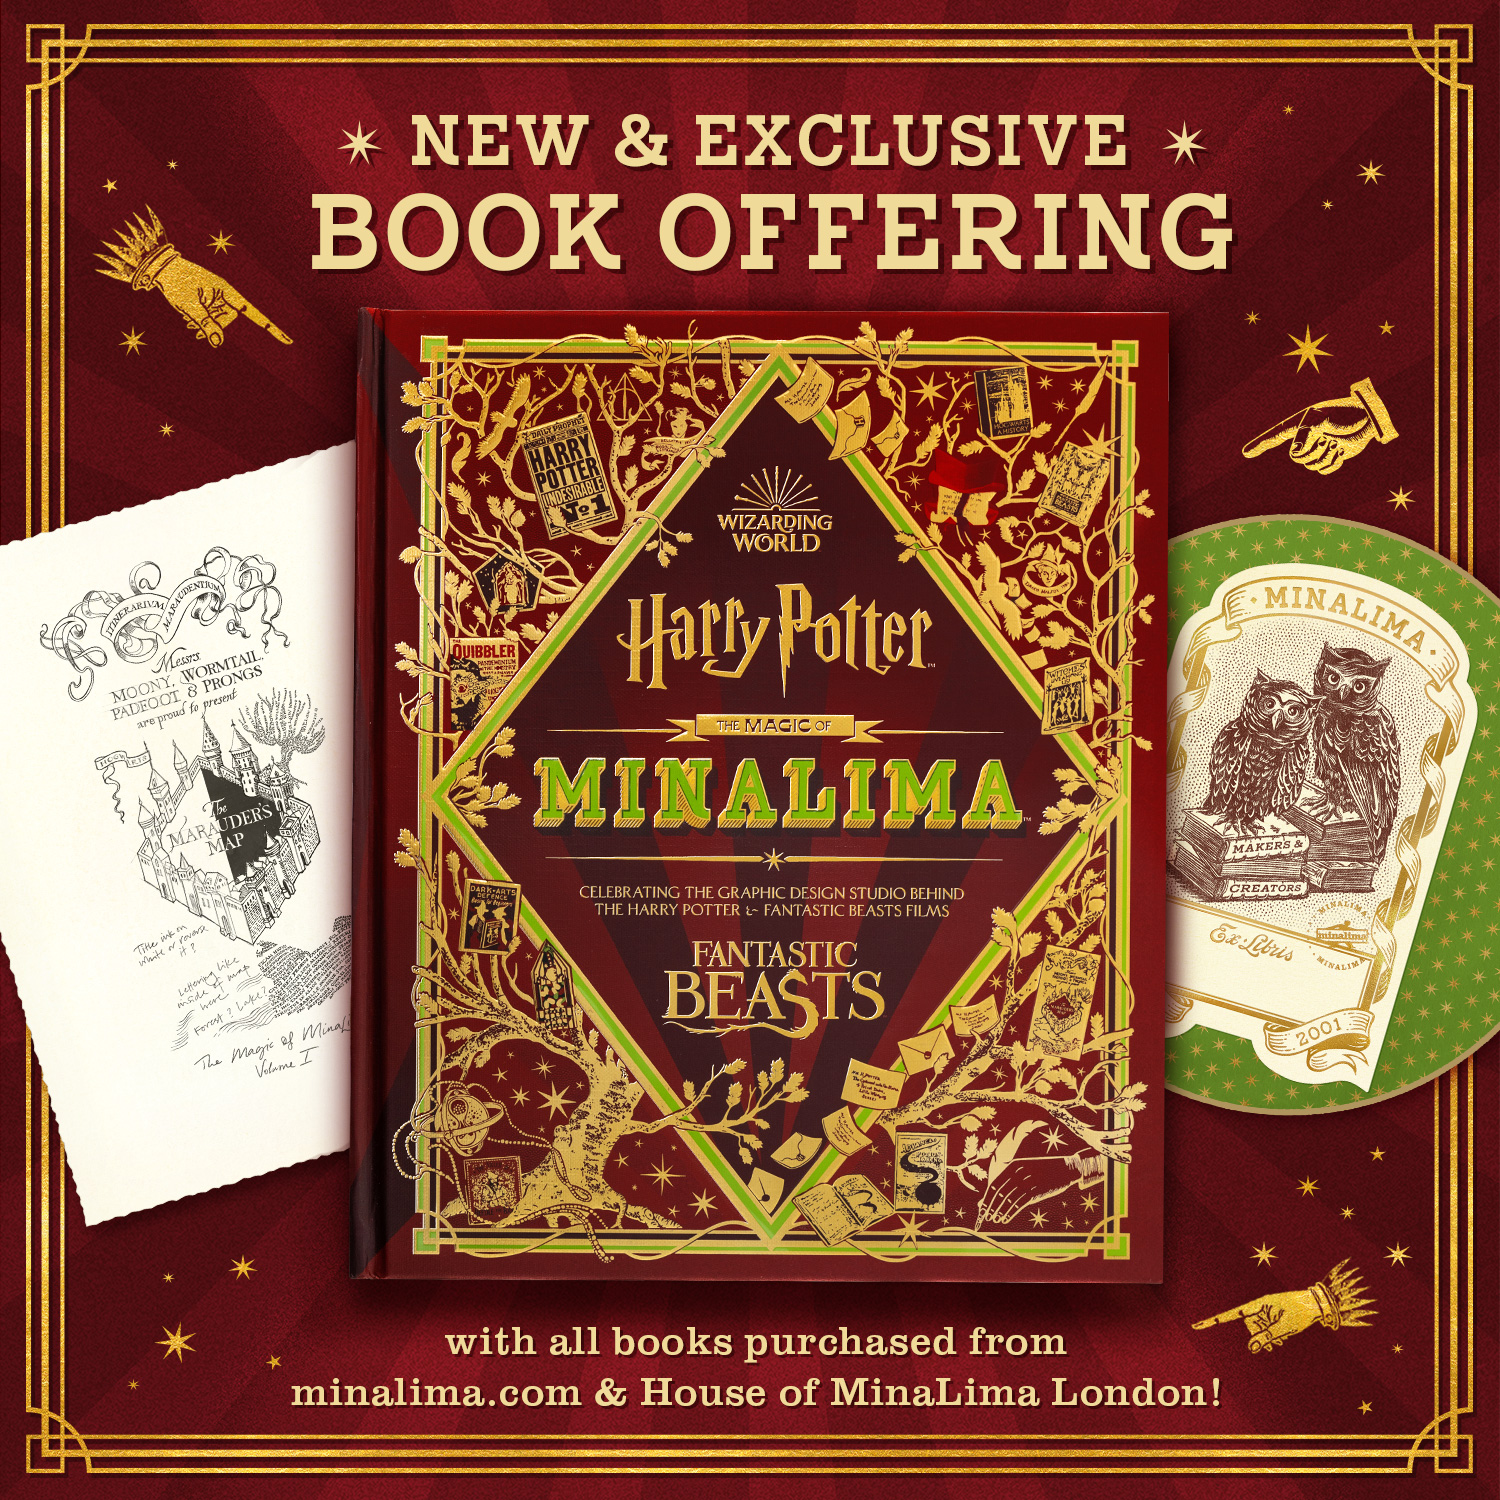 New and exclusive book offering with every book purchased from minalima.com and House of MinaLima London!